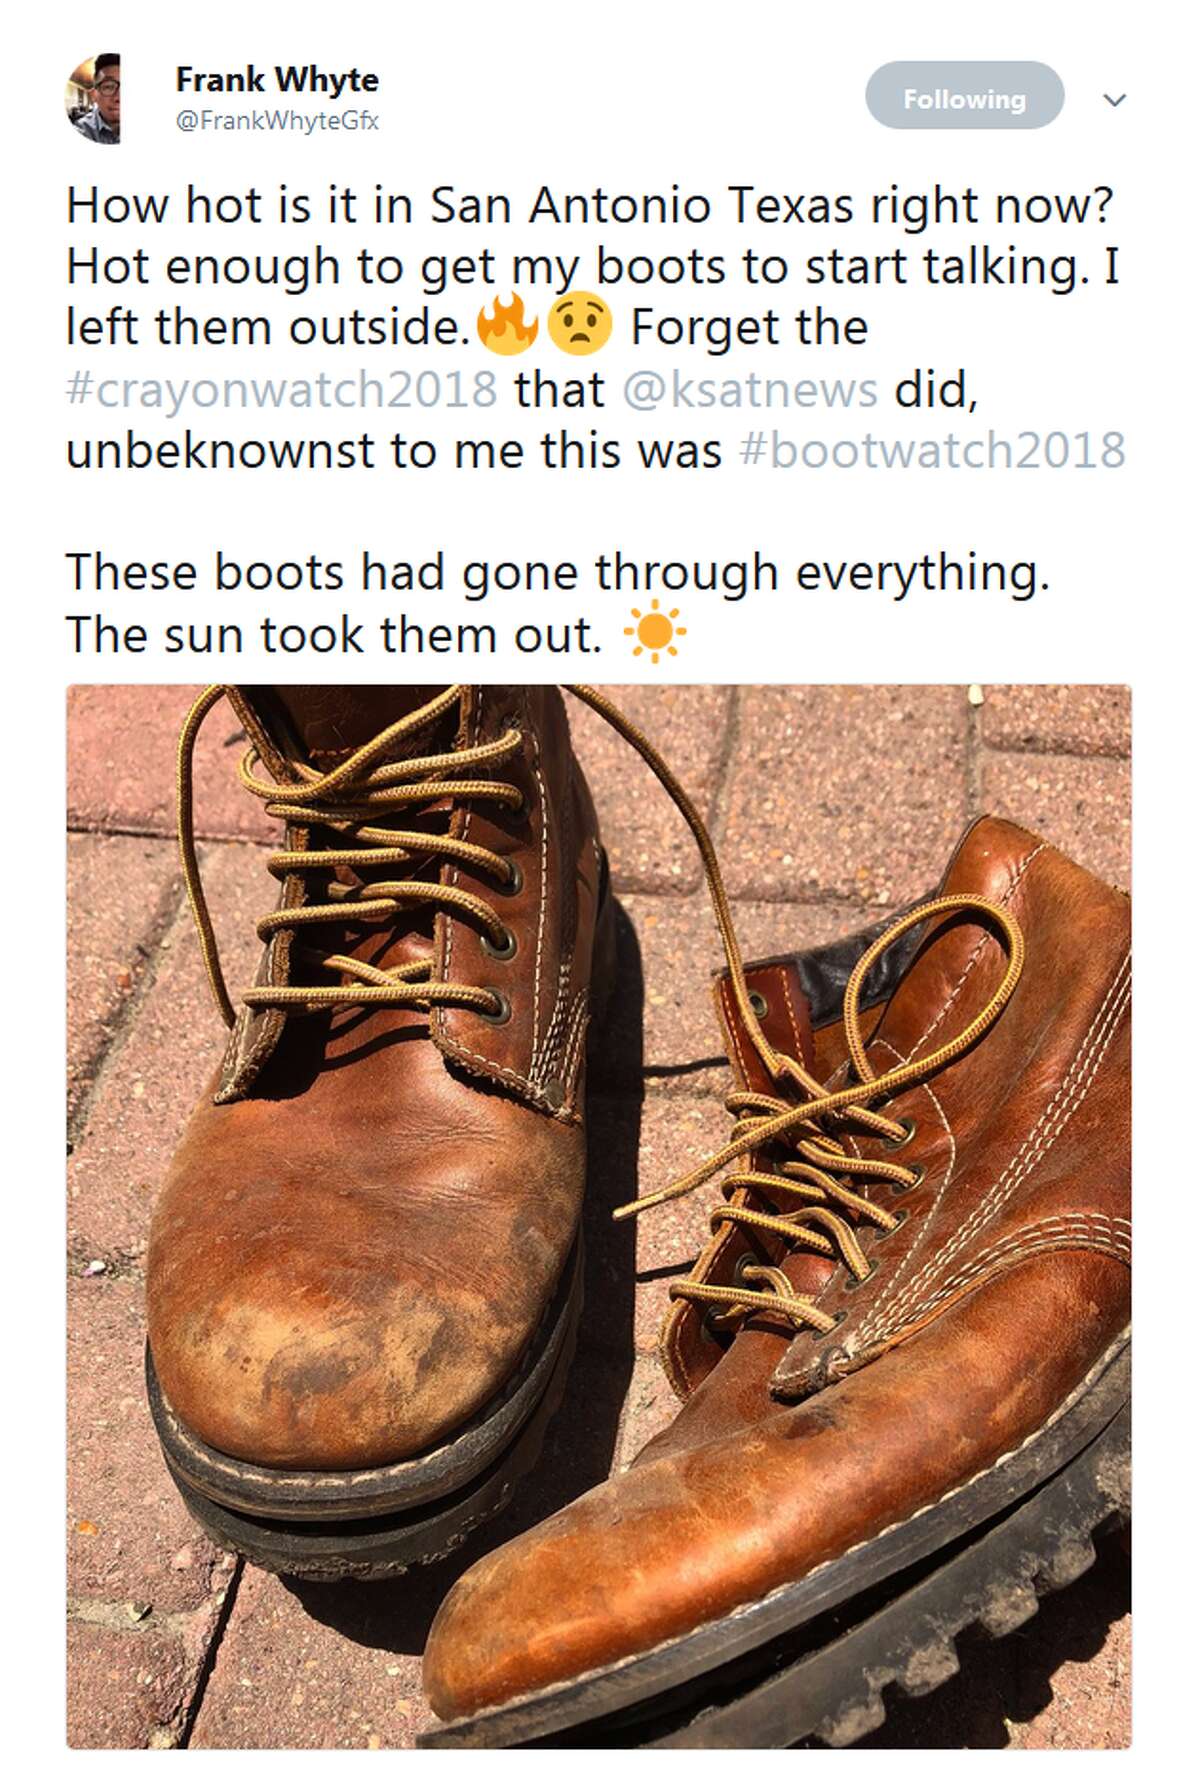 @FrankWhyteGfx: How hot is it in San Antonio Texas right now? Hot enough to get my boots to start talking. I left them outside.